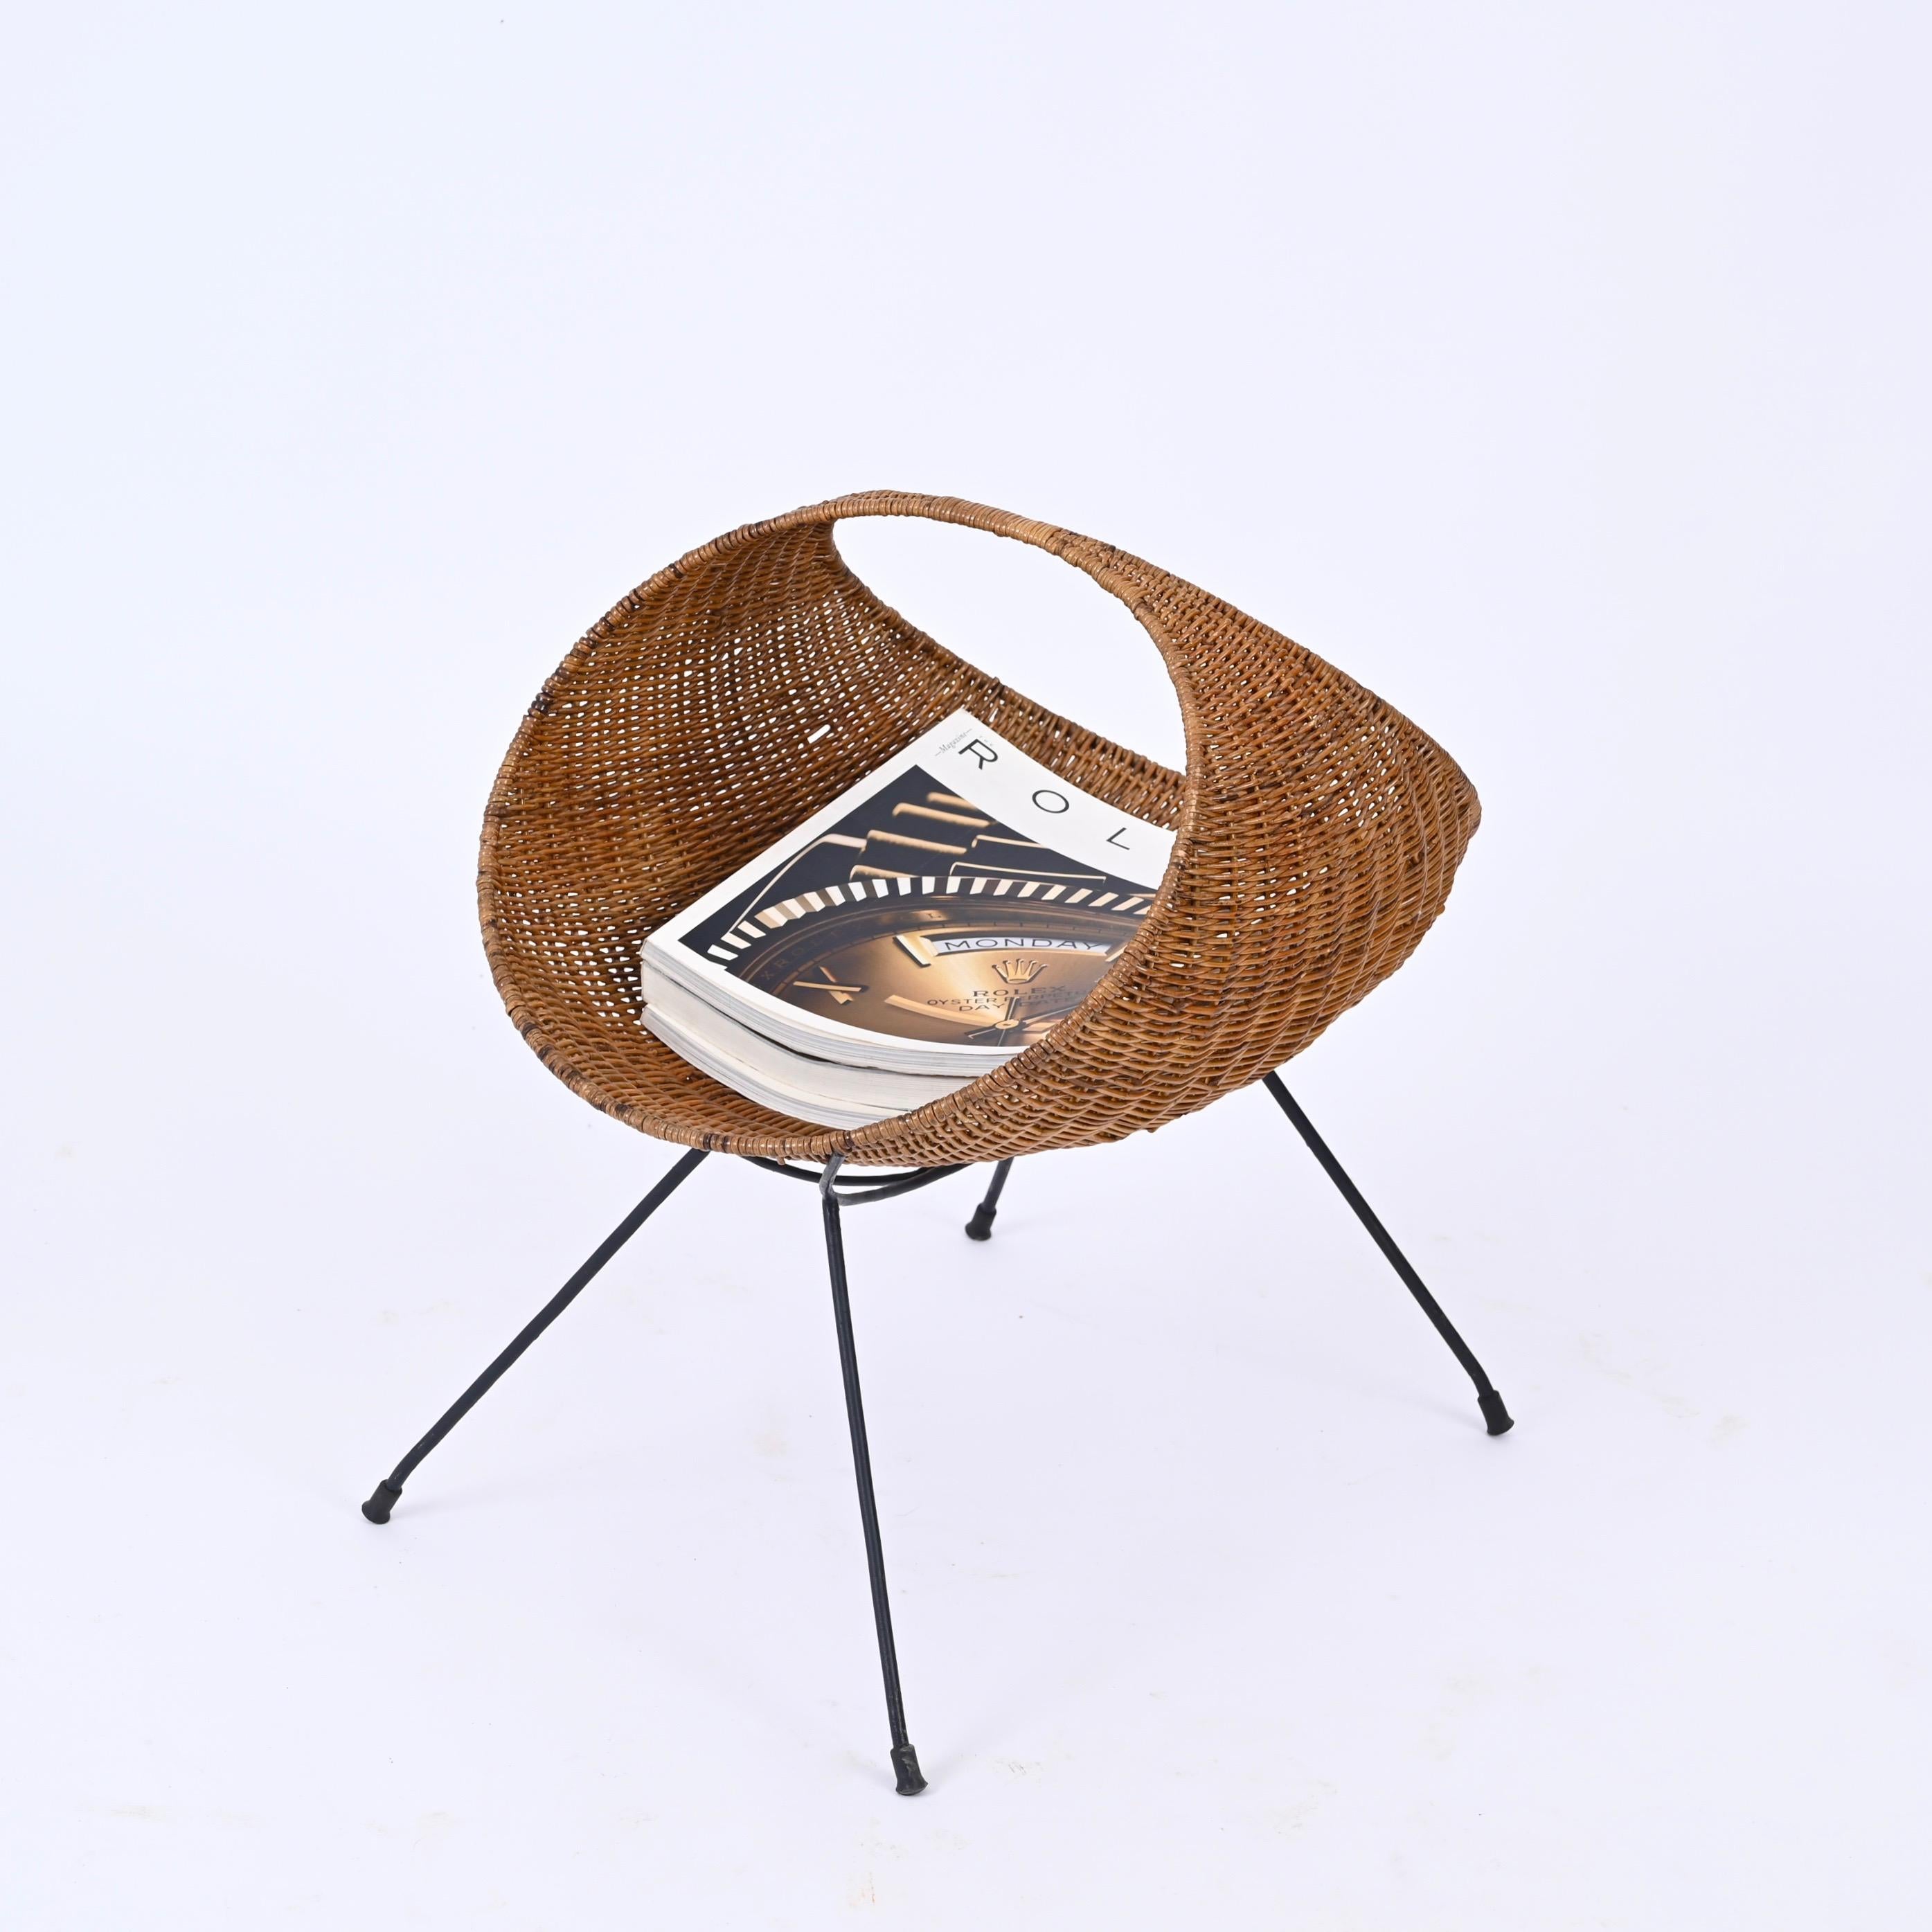 Campo & Graffi Magazine Rack in Wicker and Black Enameled Iron, Italy 1950s For Sale 1